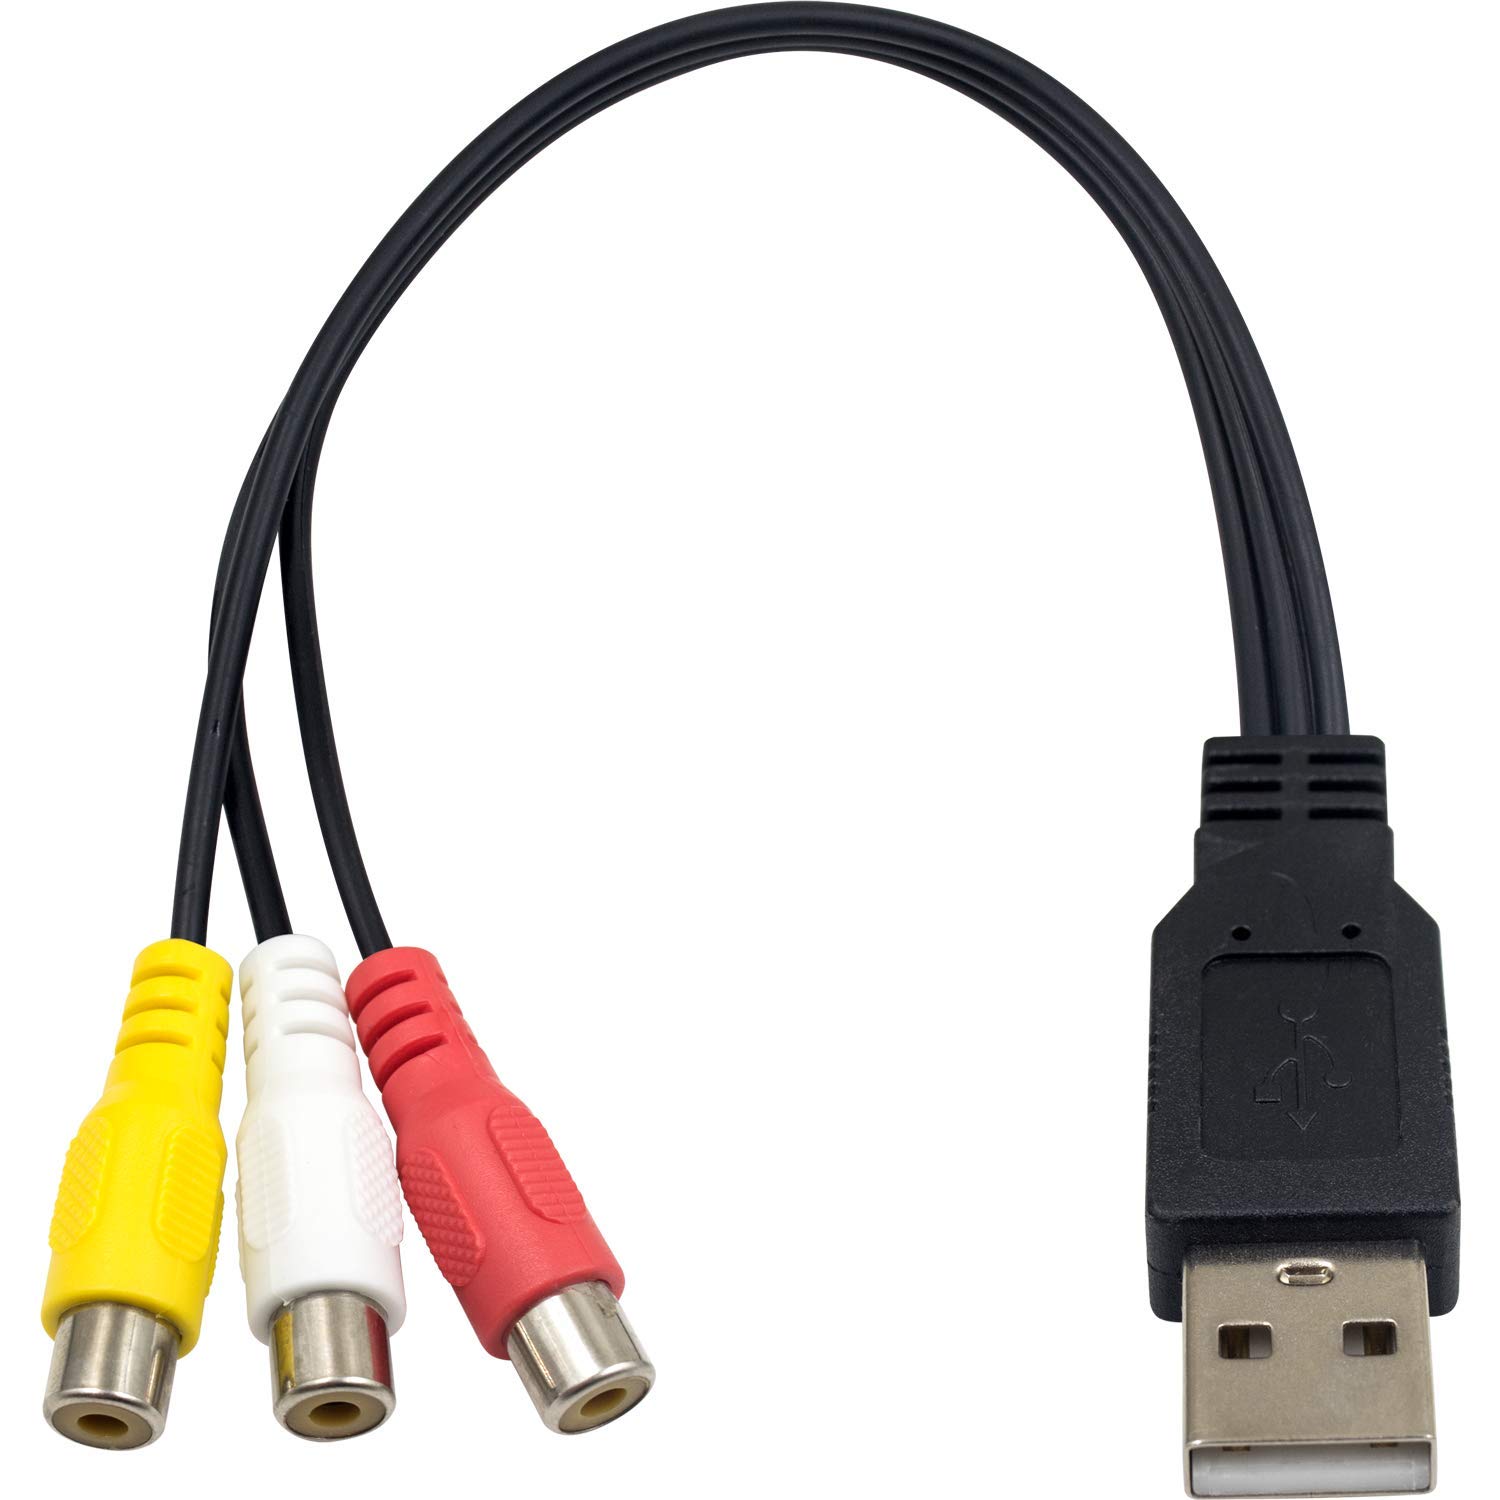 usb to rca connector